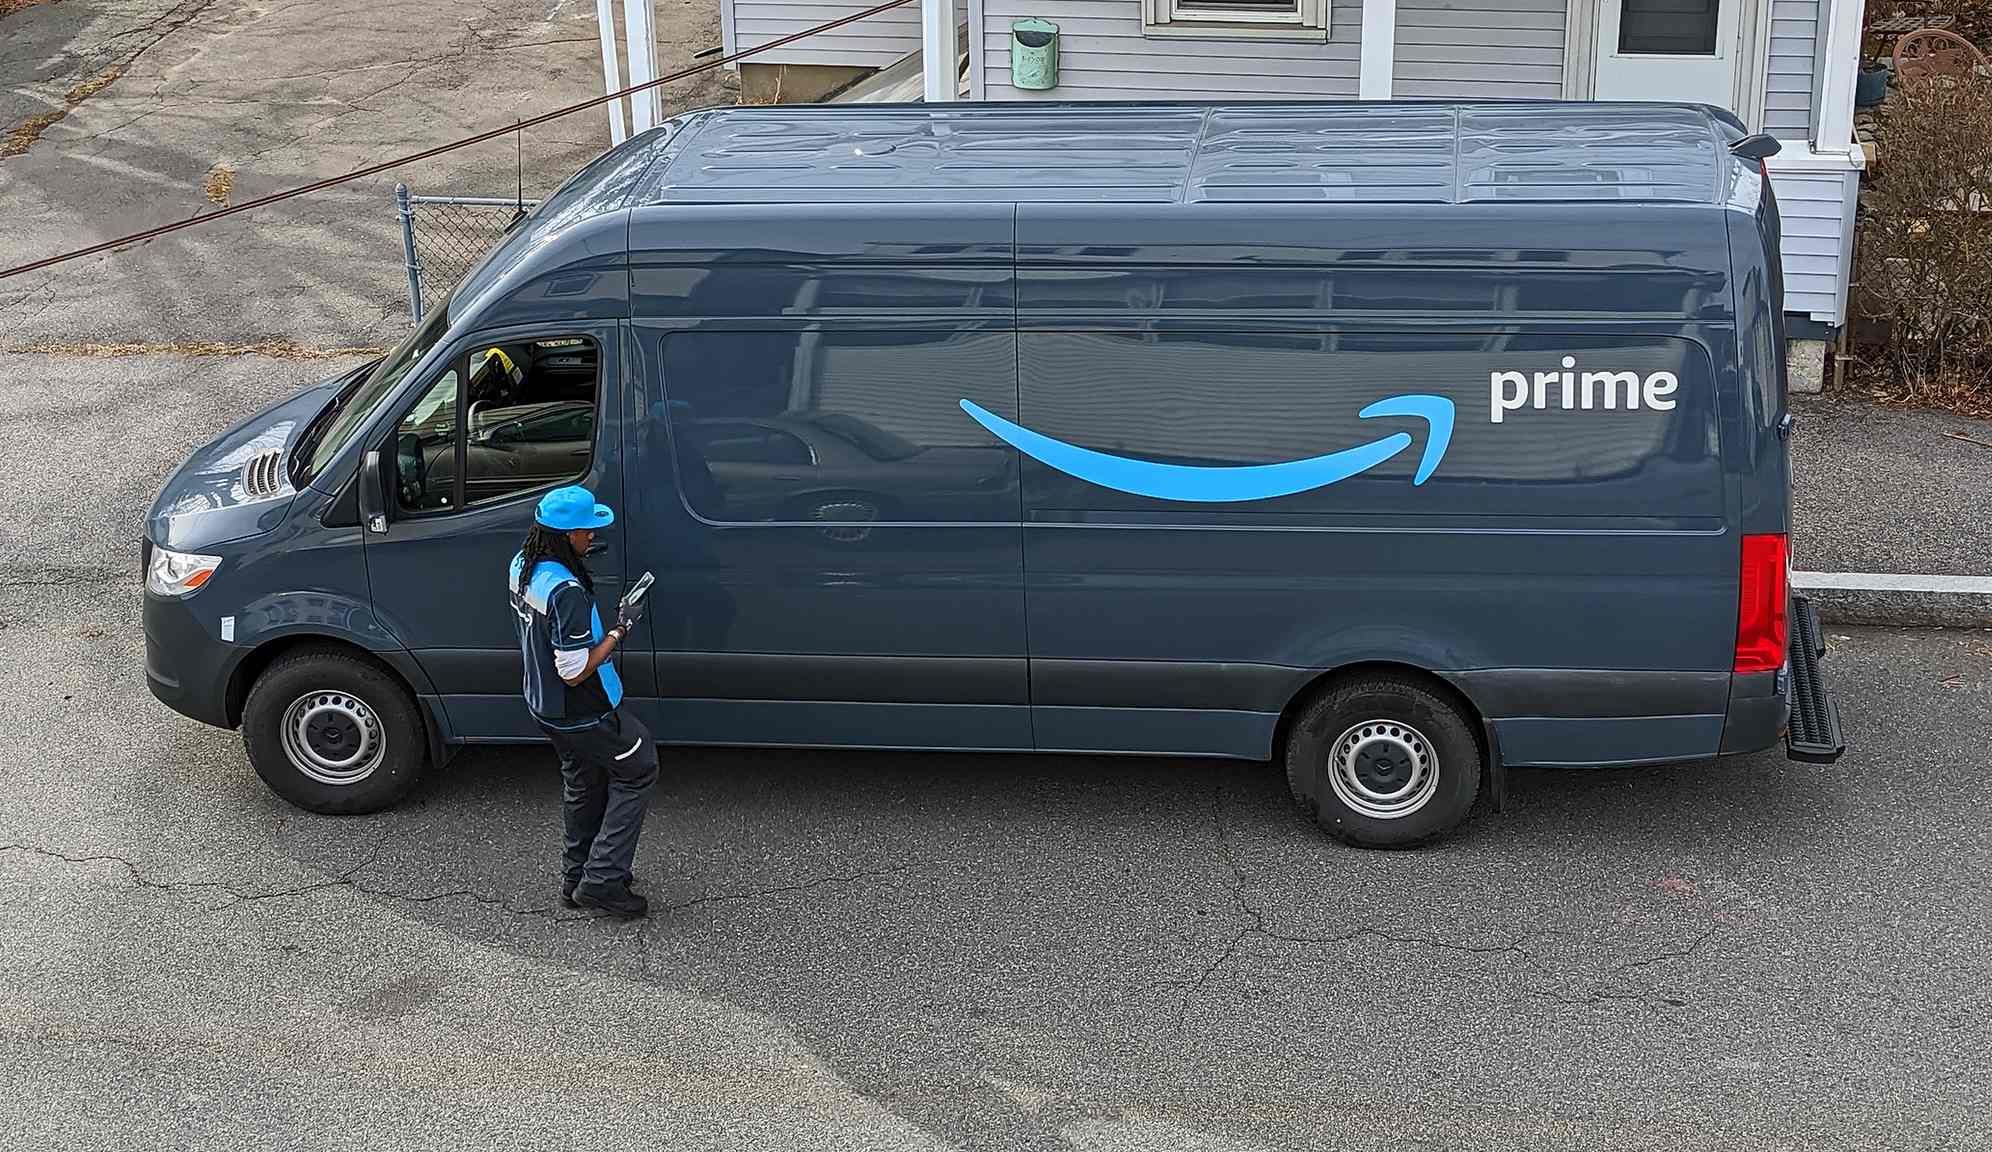 Amazon Flex Delivery Driver regarding the settlement with FTC